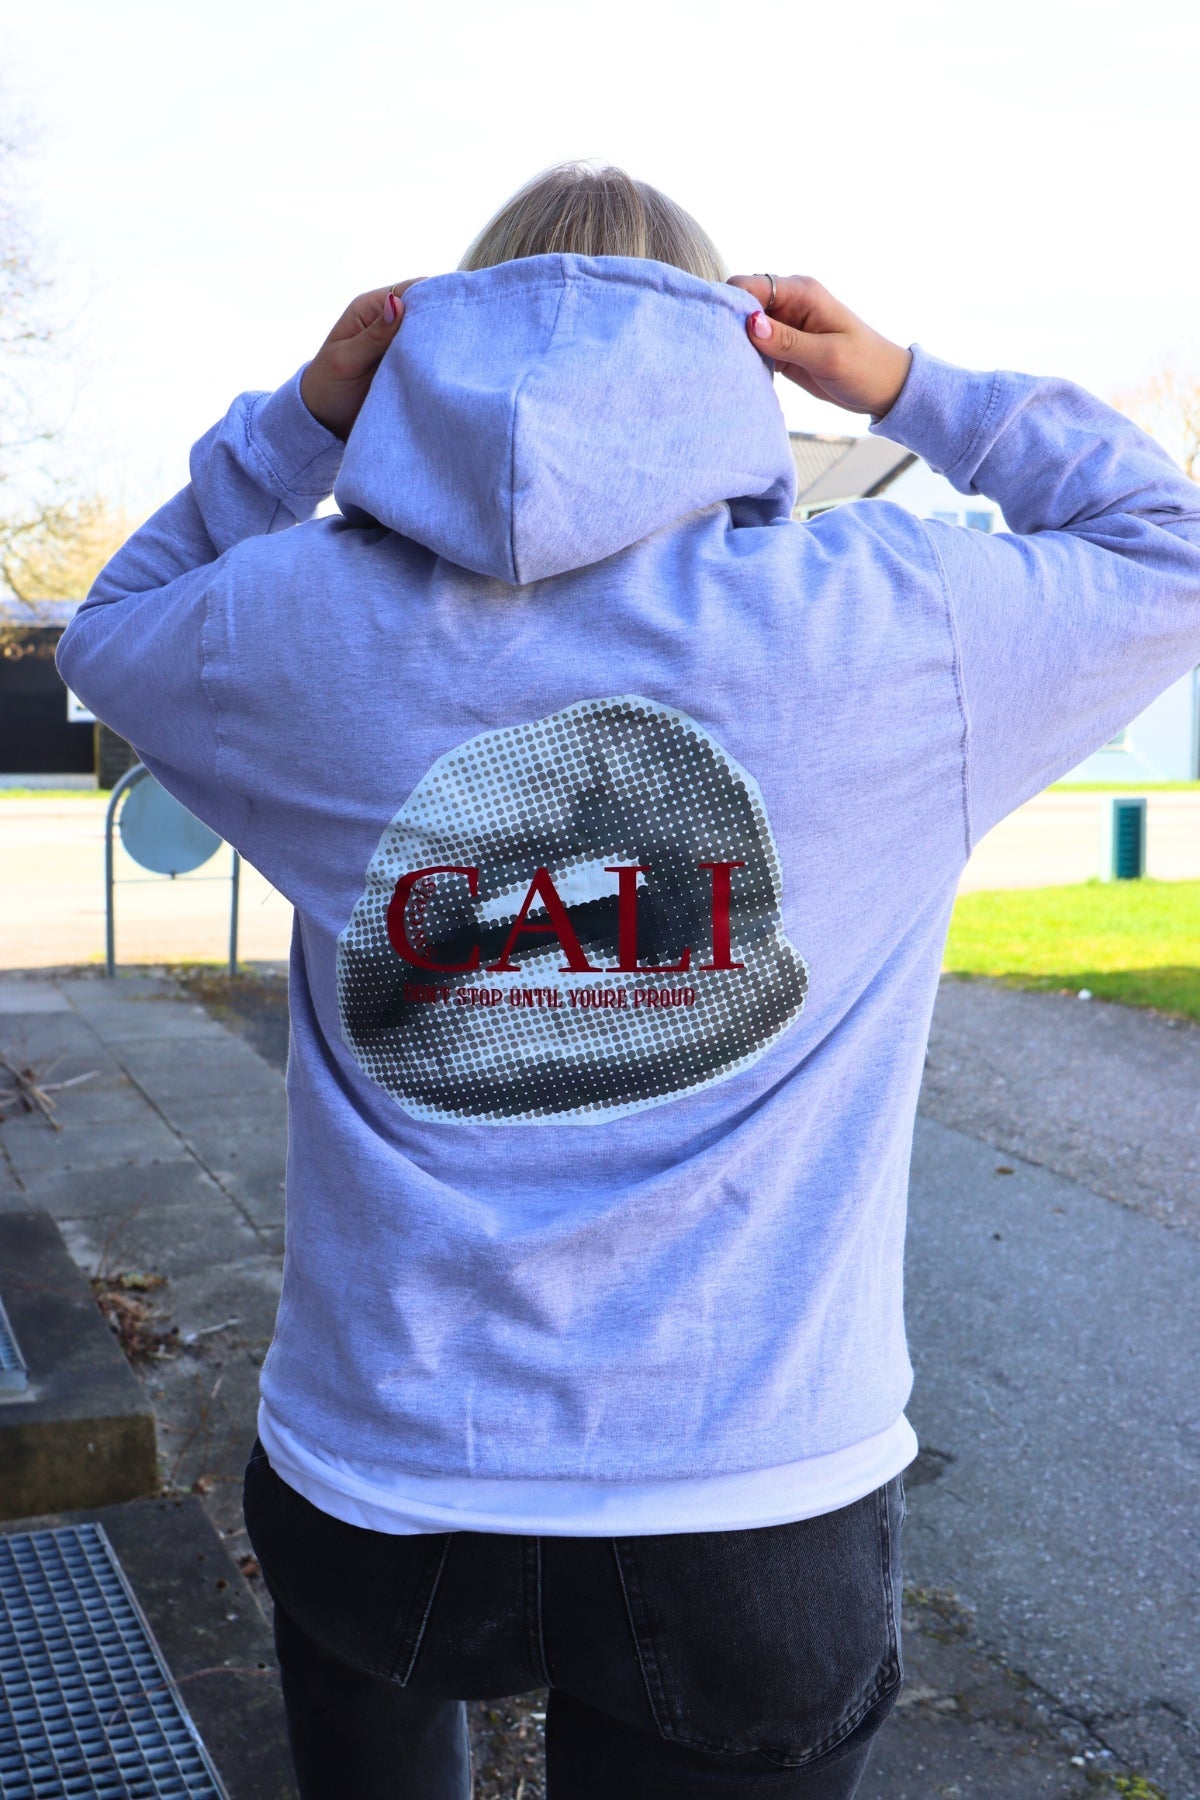 Hoodie Don't stop until you're proud - heather grey - Calisweats.dk